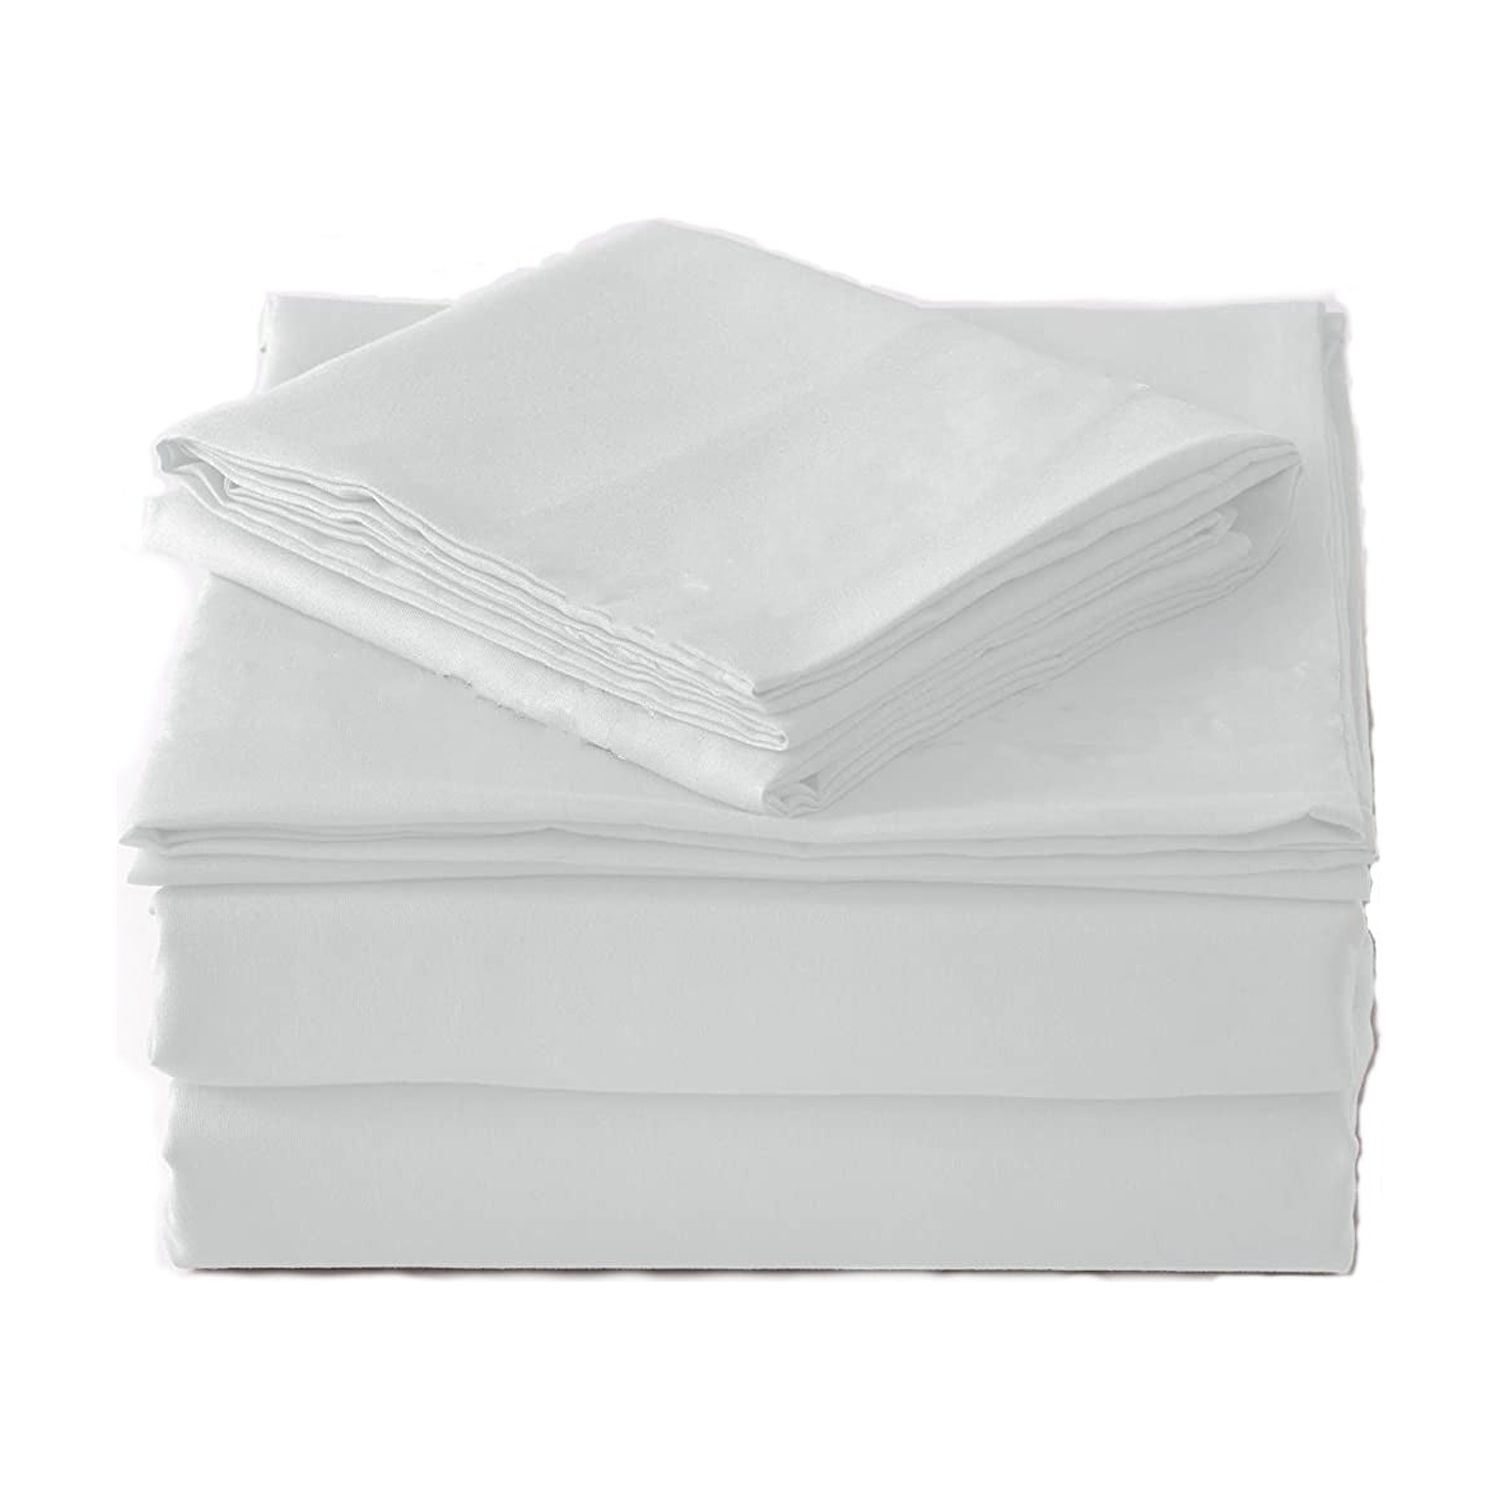 $8.39 Sheets QUEEN Size 6-Piece Set on   Over 100,000 Five-Star  Reviews - Couponing with Rachel